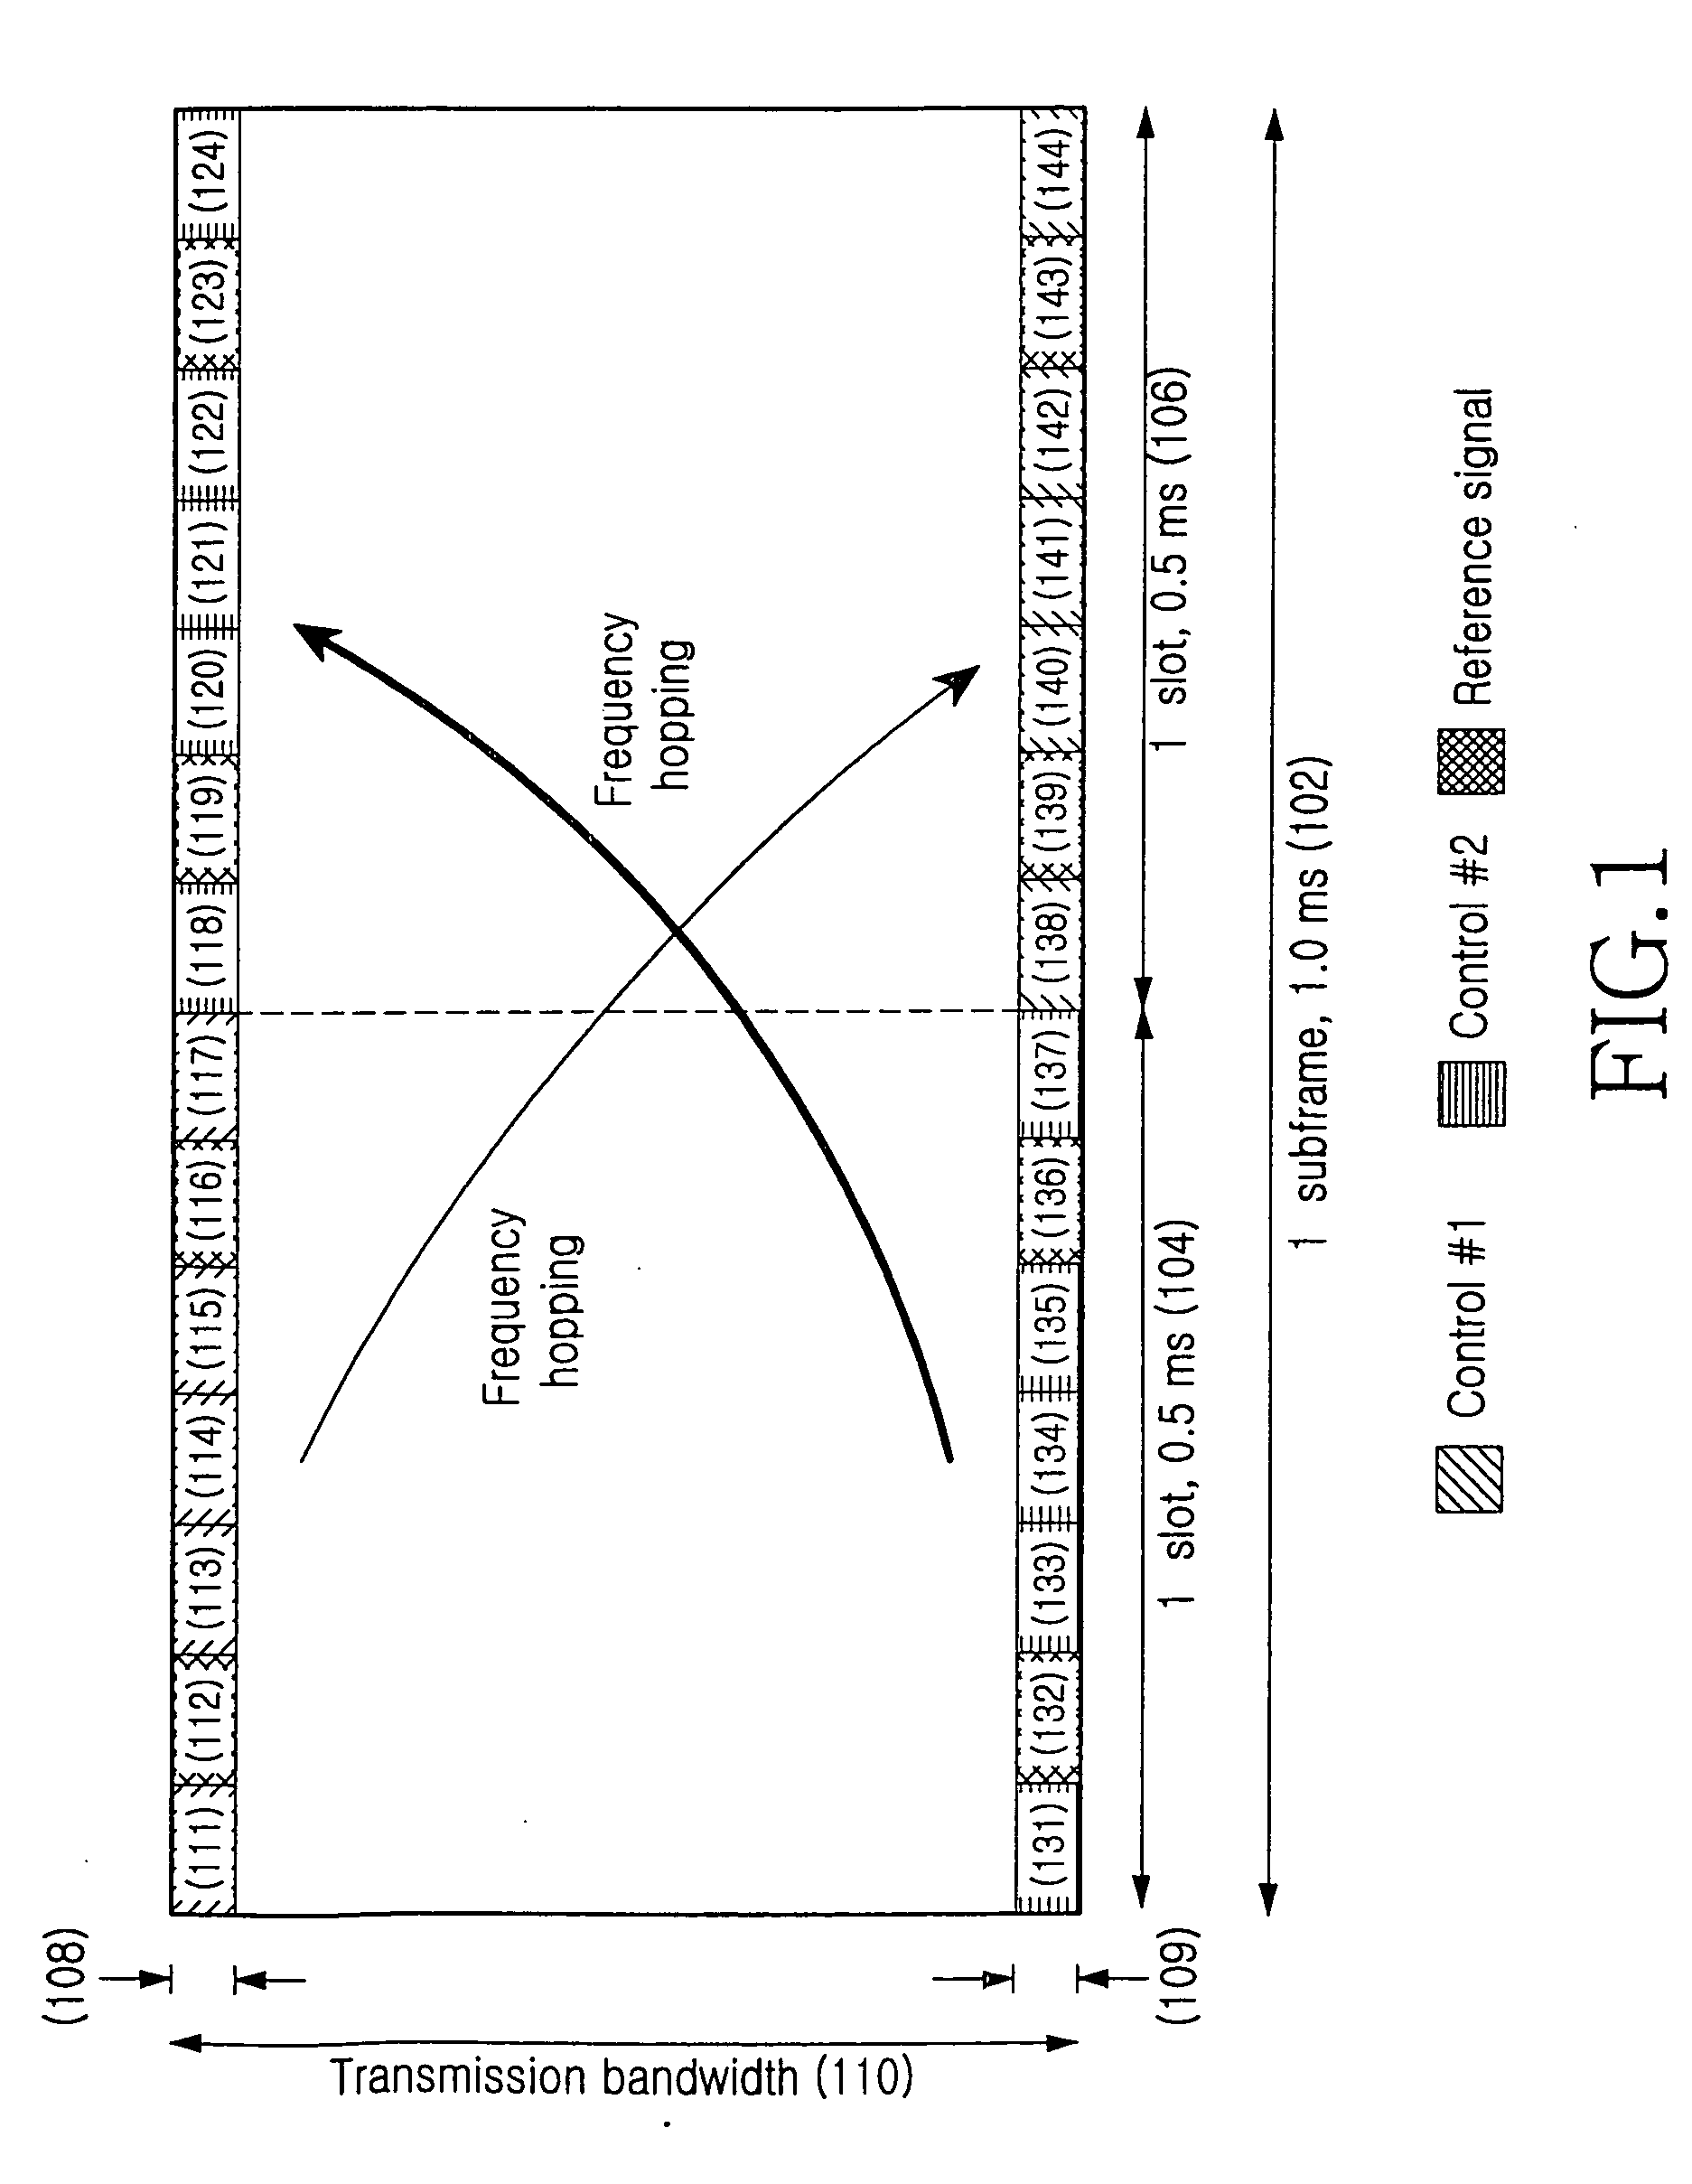 Apparatus and method for allocating code resources to uplink ack/nack channels in a cellular wireless communication system